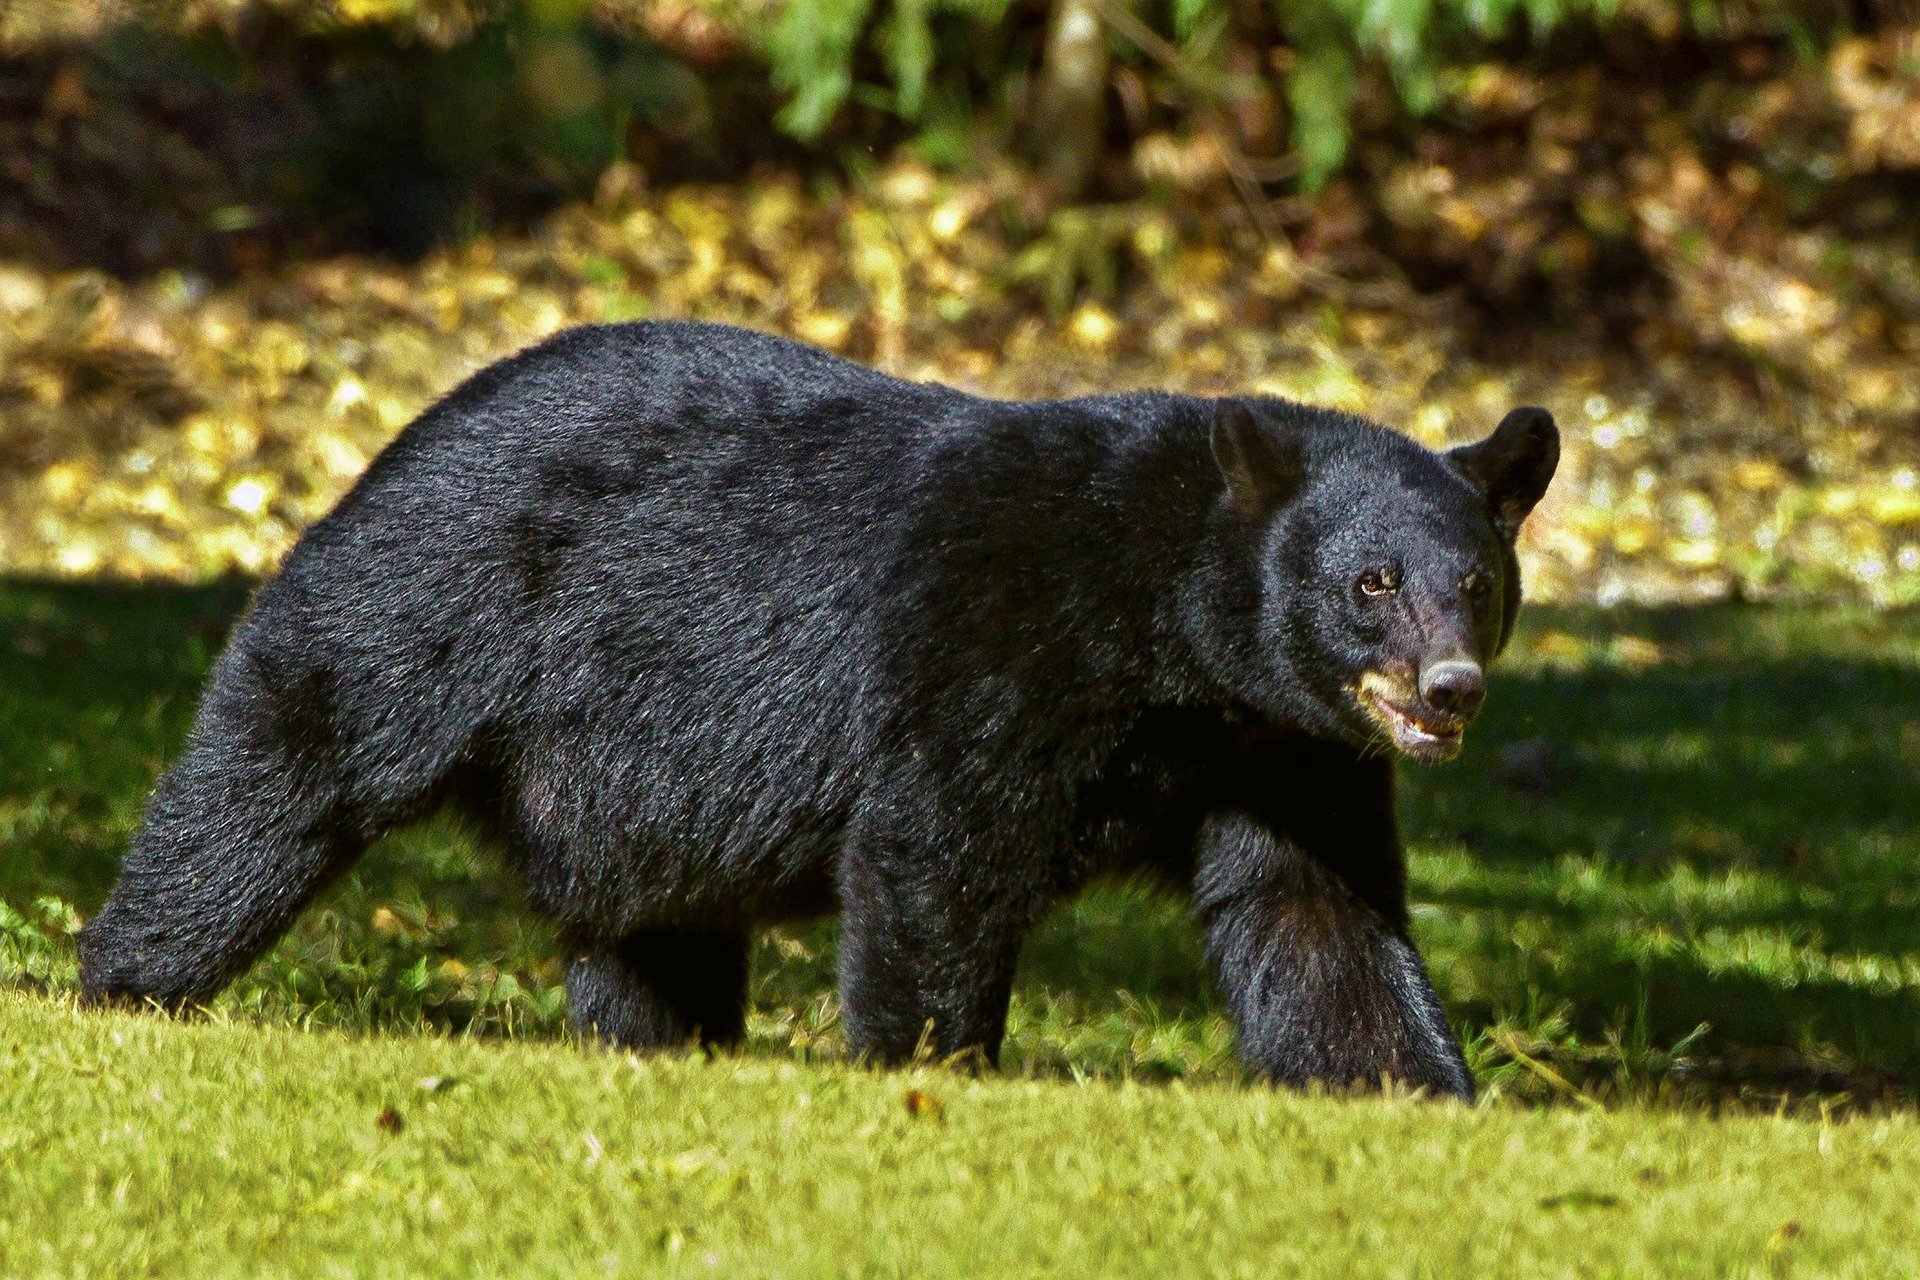 A large black bear walking th rough an open clearing.